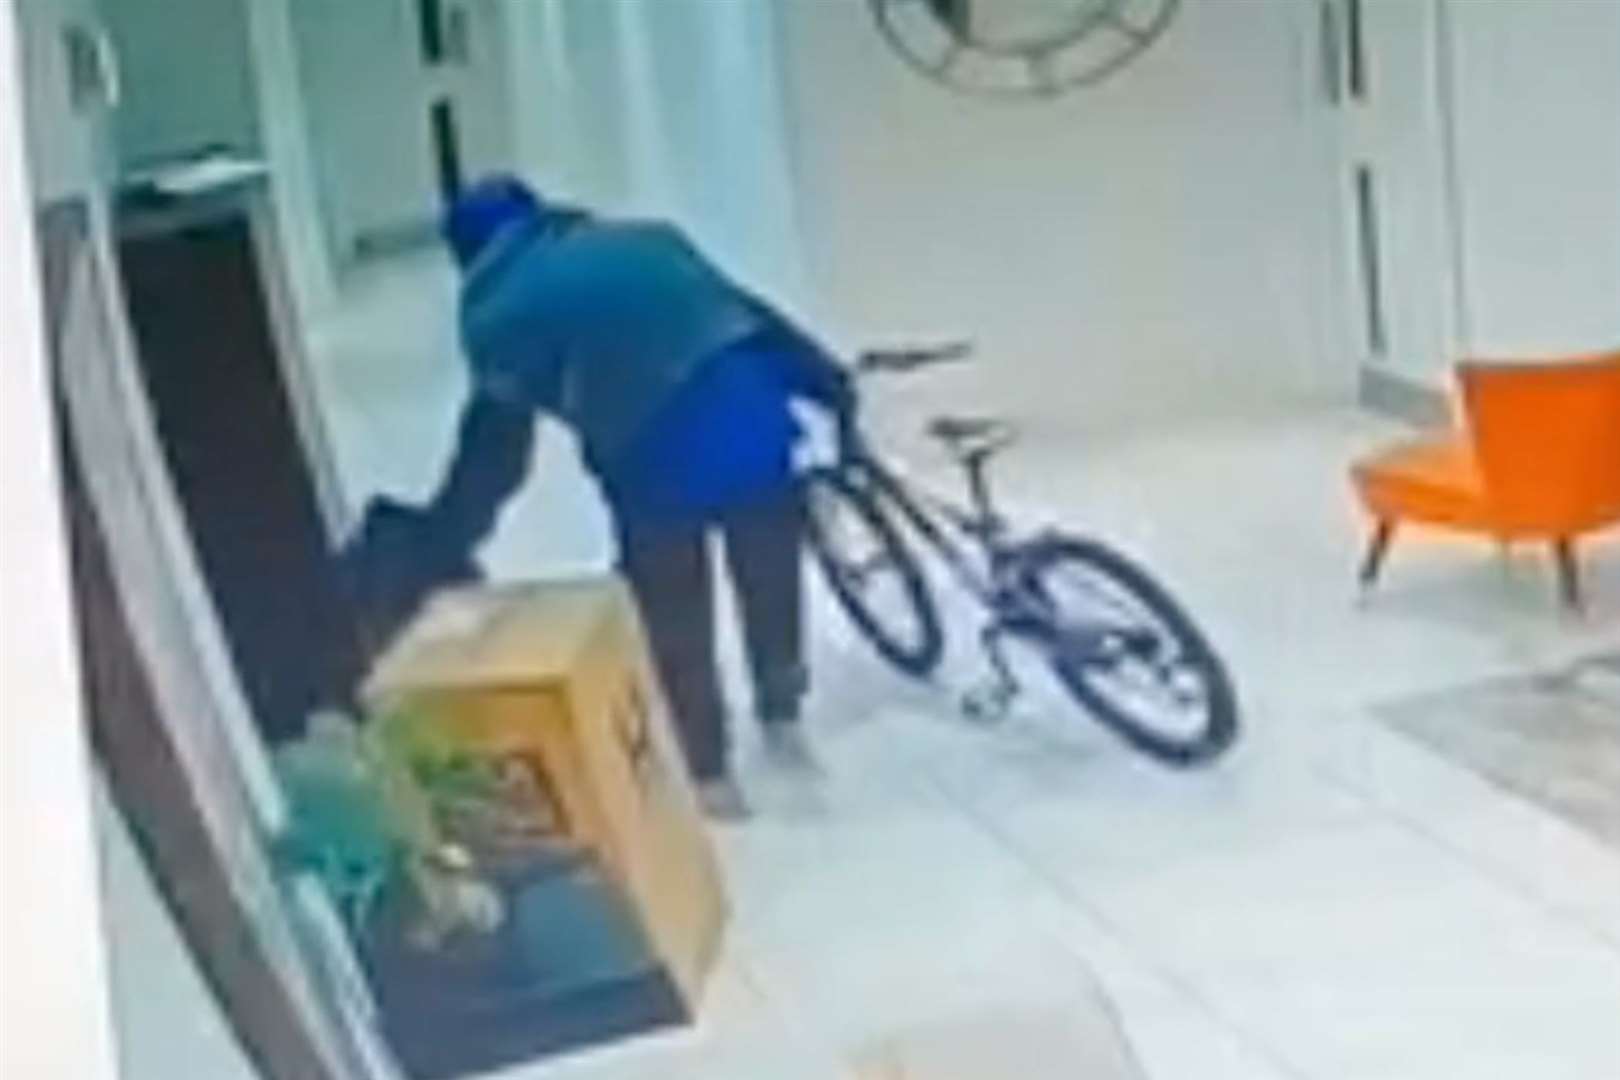 The man returned a second time to steal another parcel